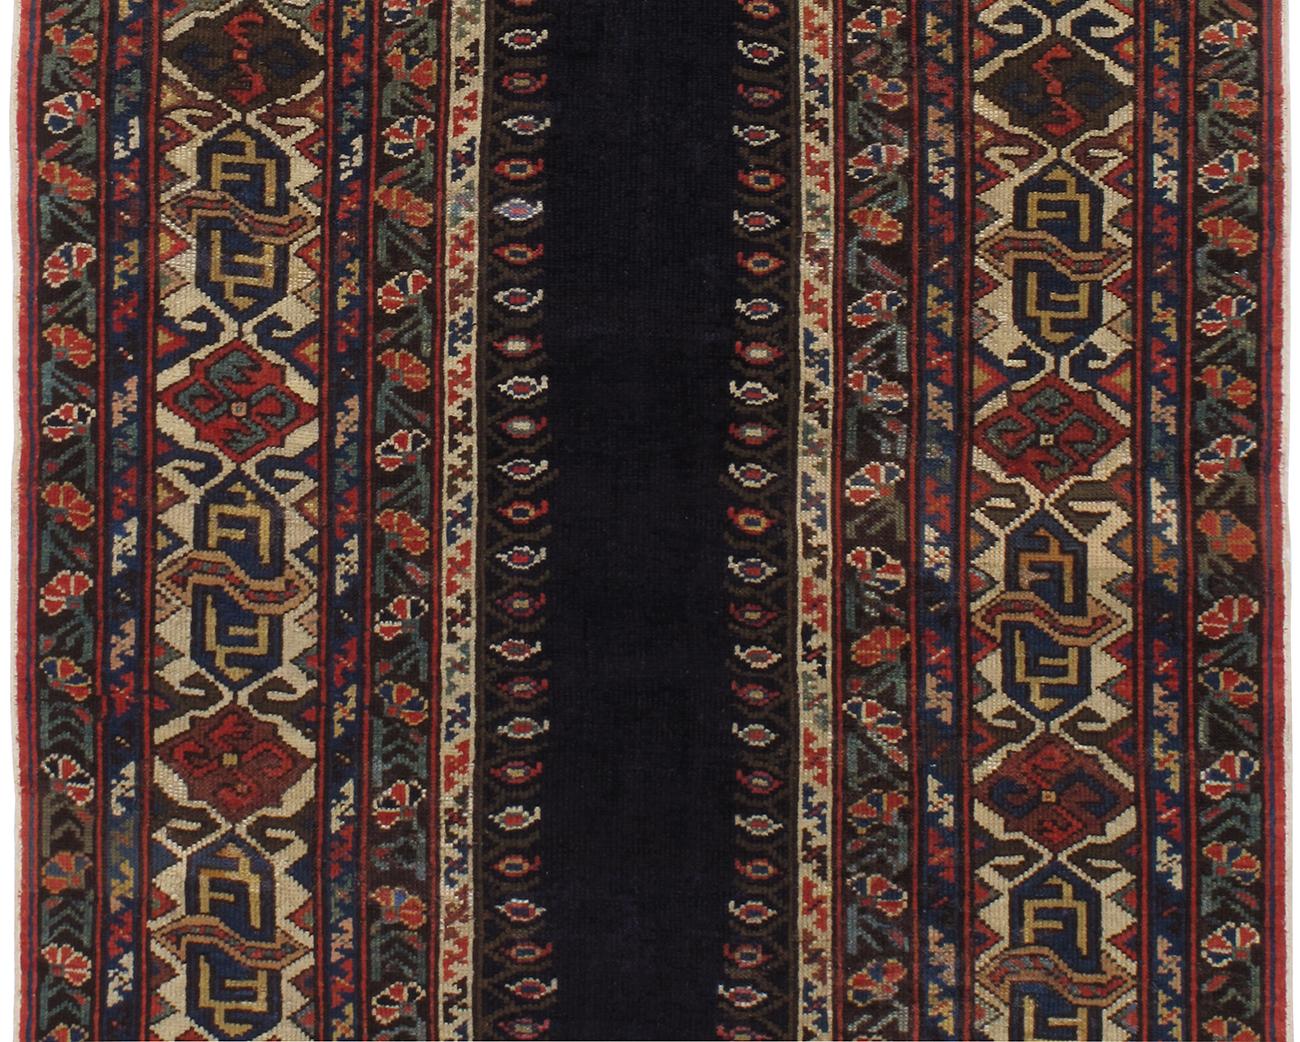 Antique Caucasian Talish runner with a dark navy background and field enclosed by a rich, intricate border. Runner size is 3'0